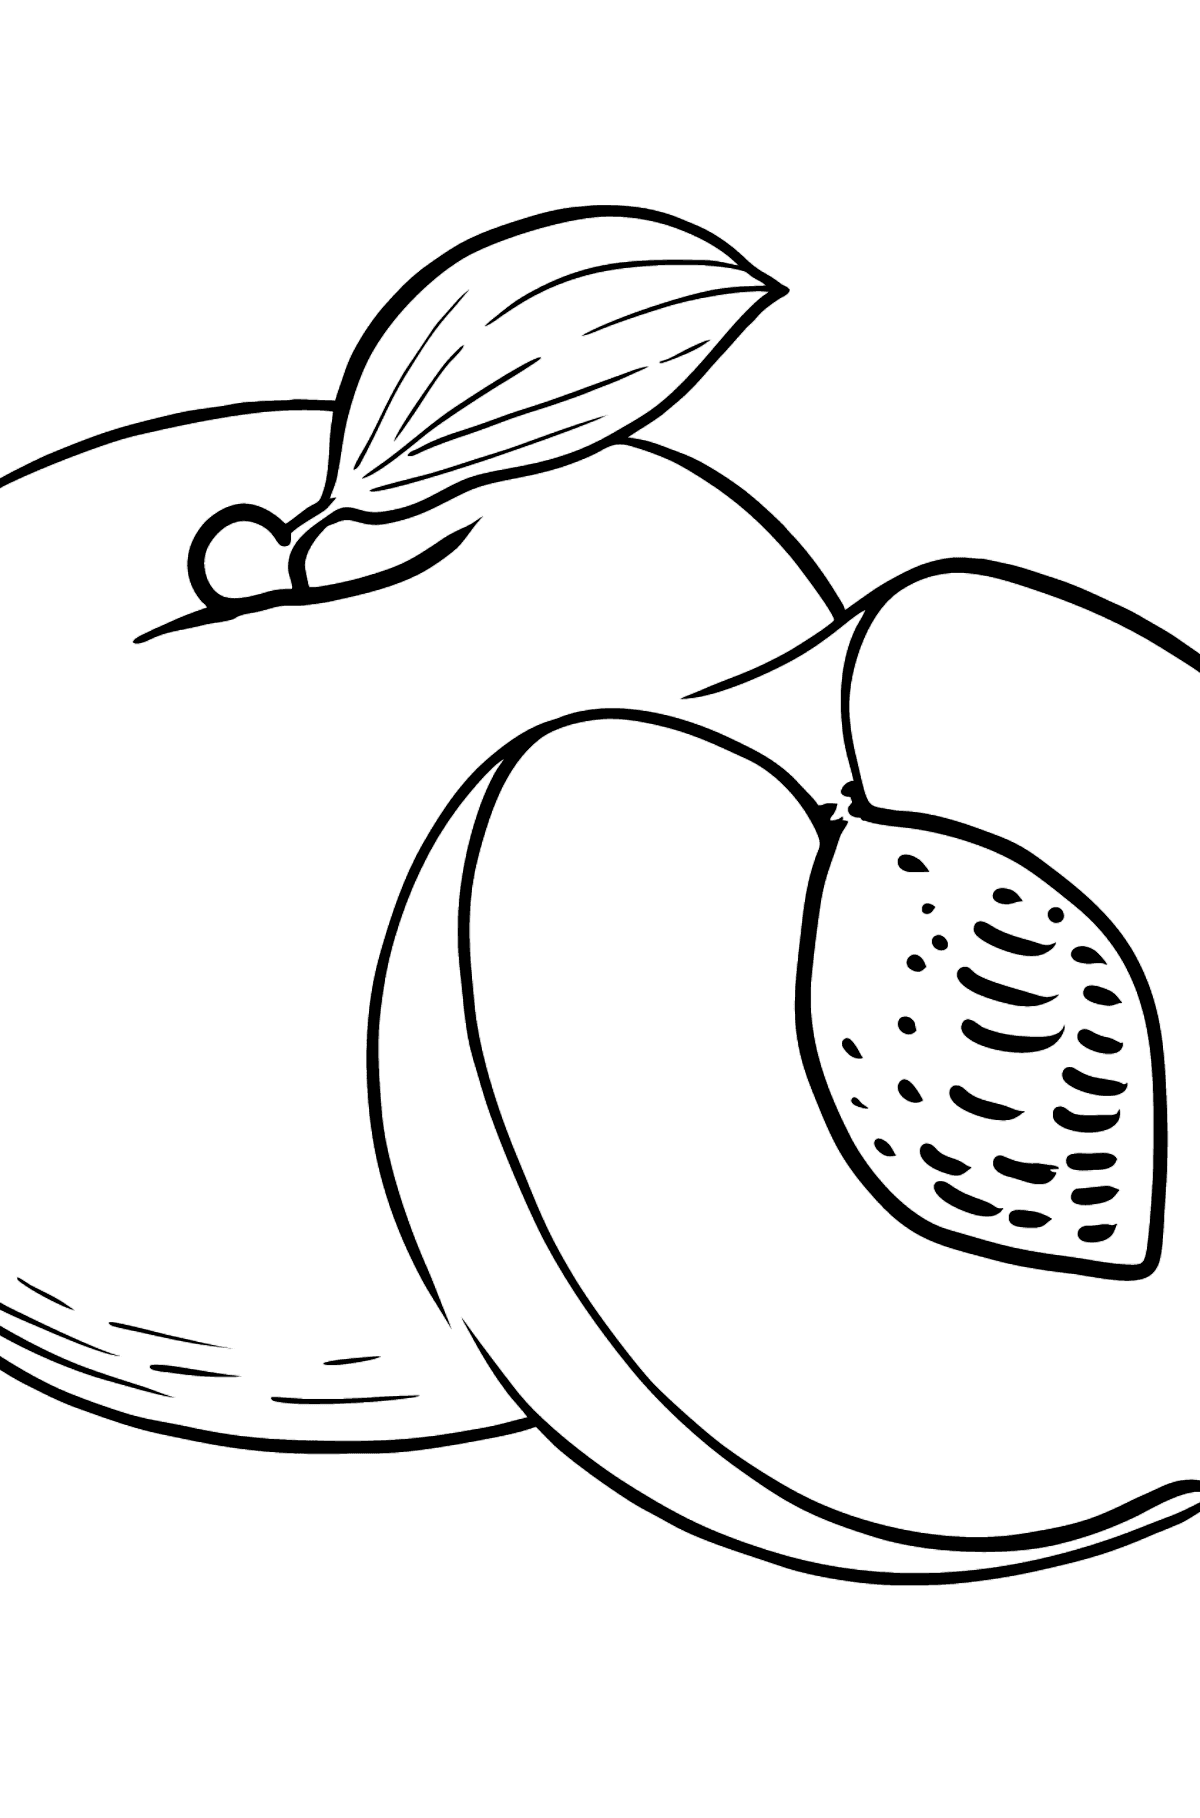 Peache coloring page - Coloring Pages for Kids